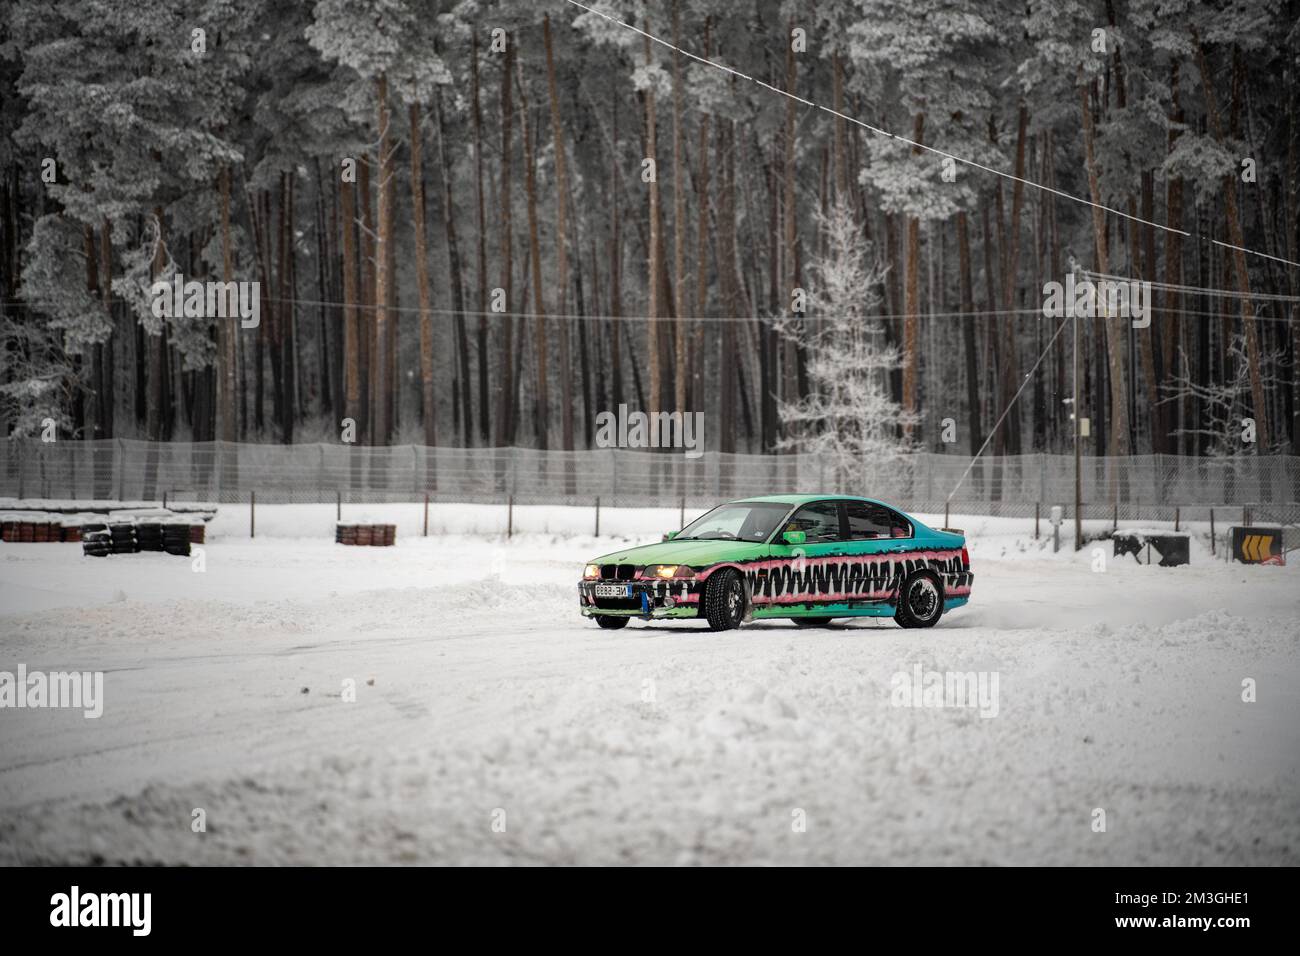 12-12-2022 Riga, Latvia  a car is parked in the snow near a forest with trees and a fence in the background. . Stock Photo